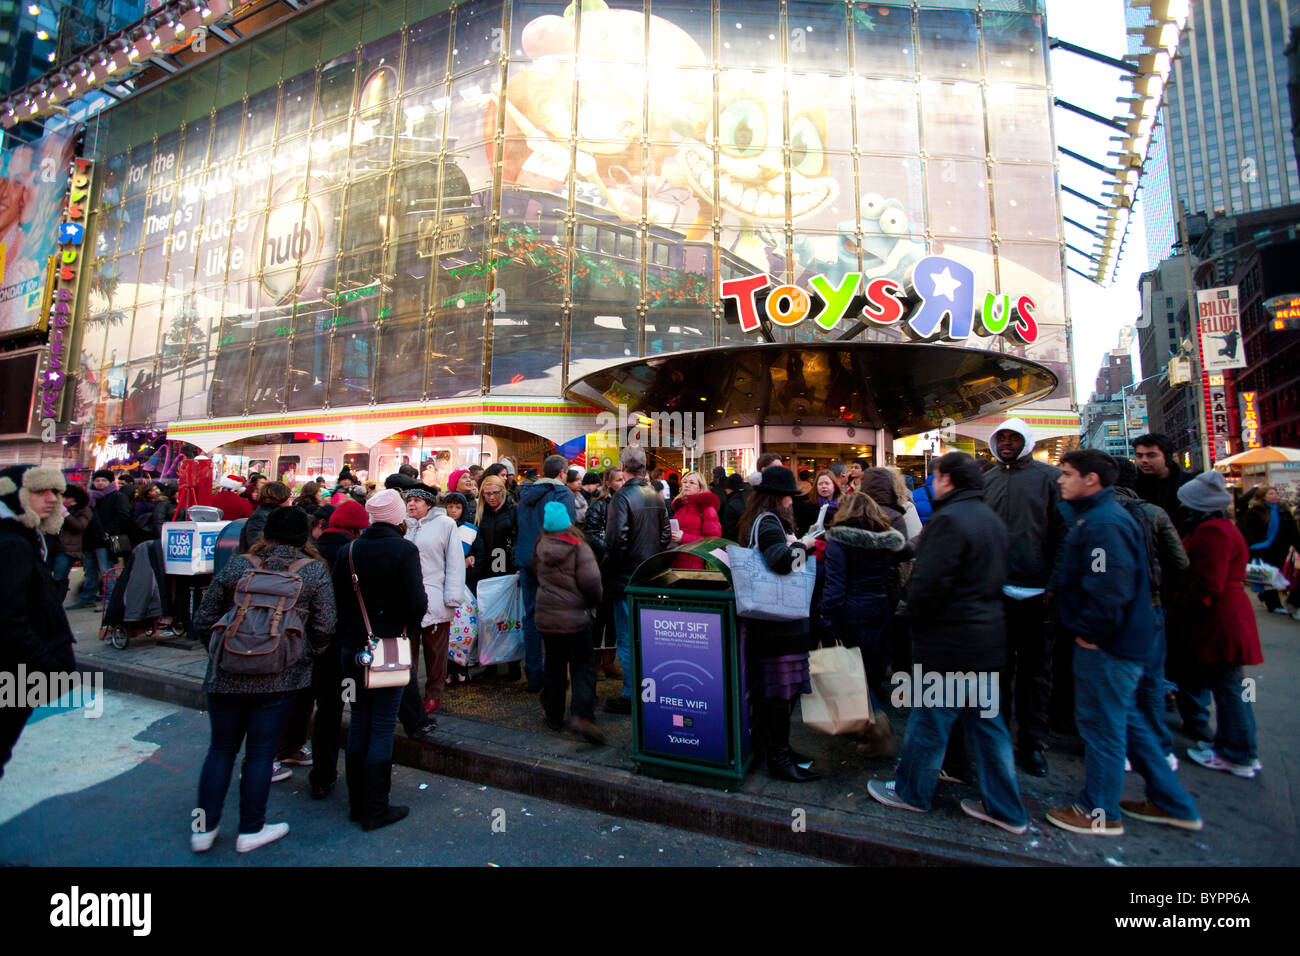 Huge crowd in front of Toys r us store at New York Times square for Christmas sales in December 2010 Stock Photo